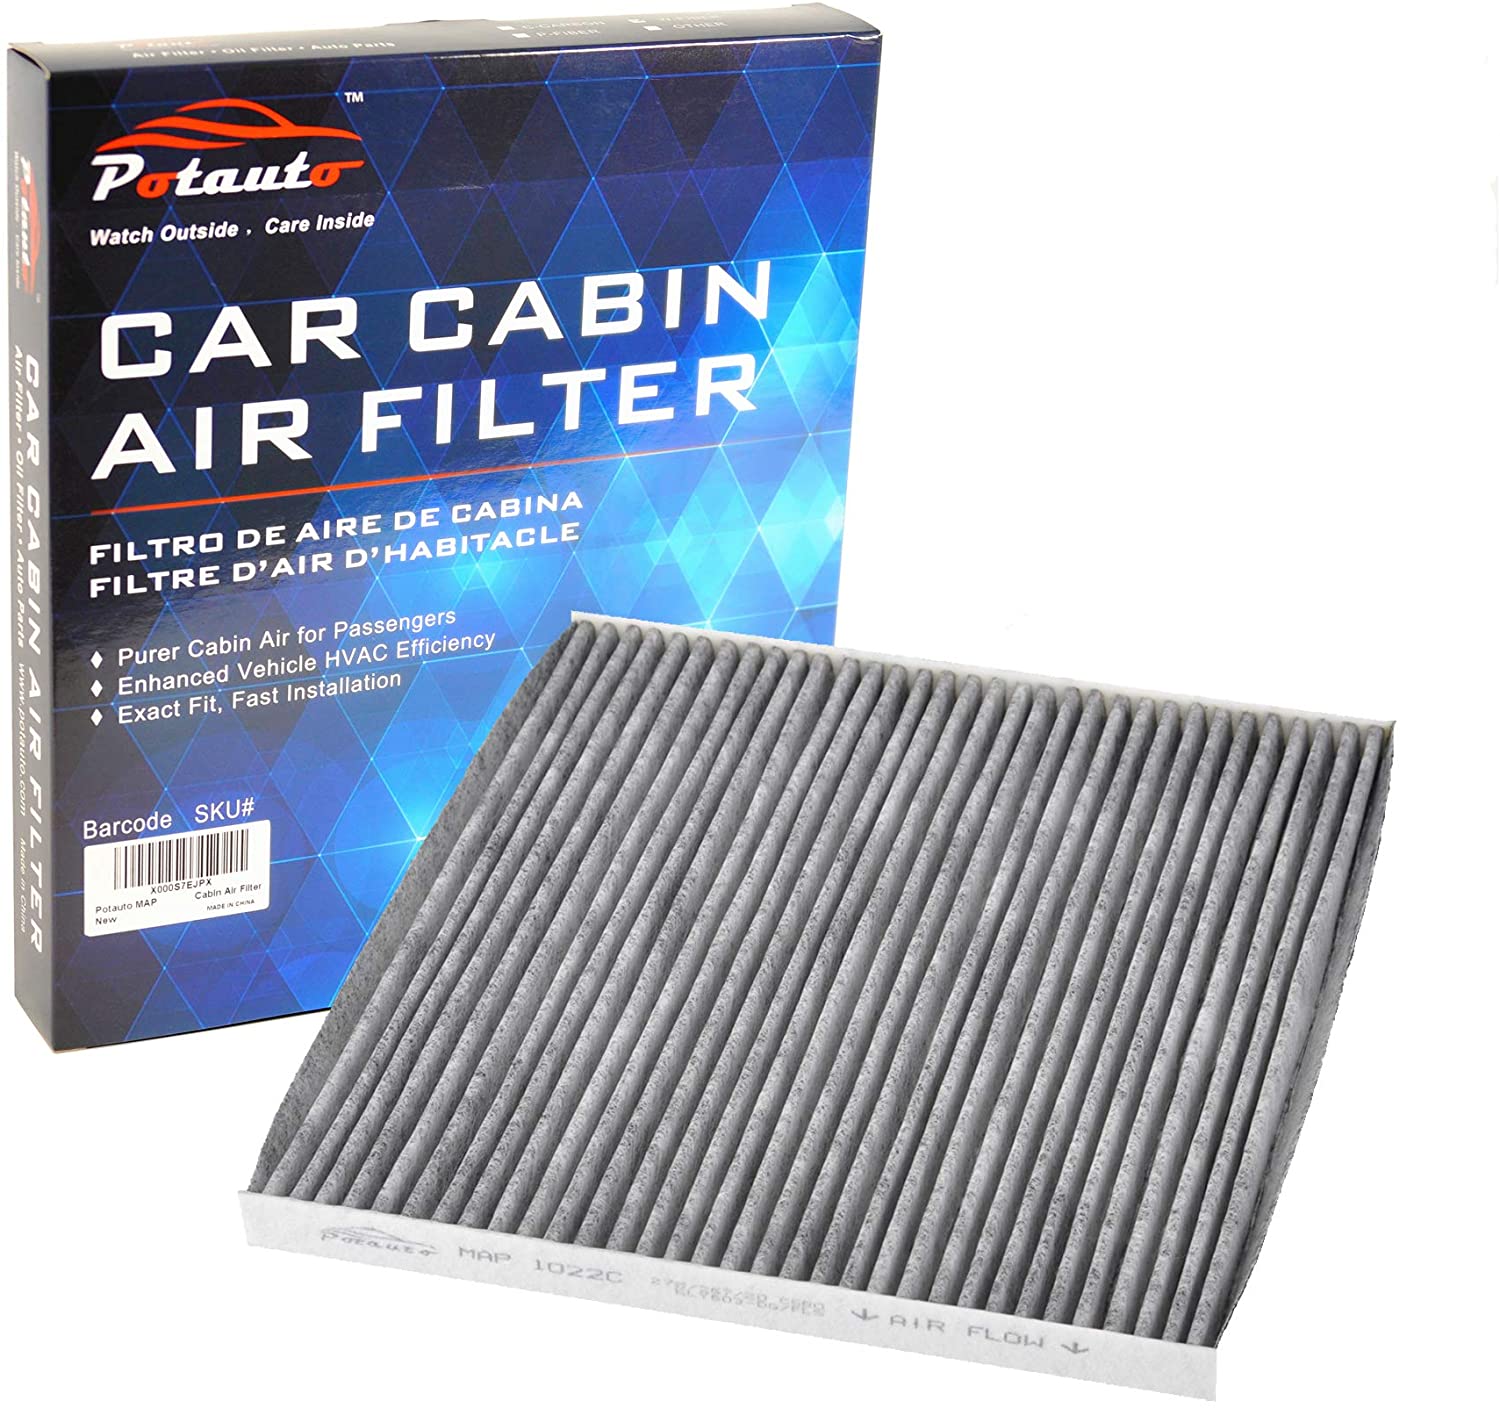 POTAUTO MAP 1022C (20-Pack) Heavy Activated Carbon Car Cabin Air Filter Replacement compatible with NISSAN, Altima, Maxima Murano Cross Cabriolet, Murano, Quest